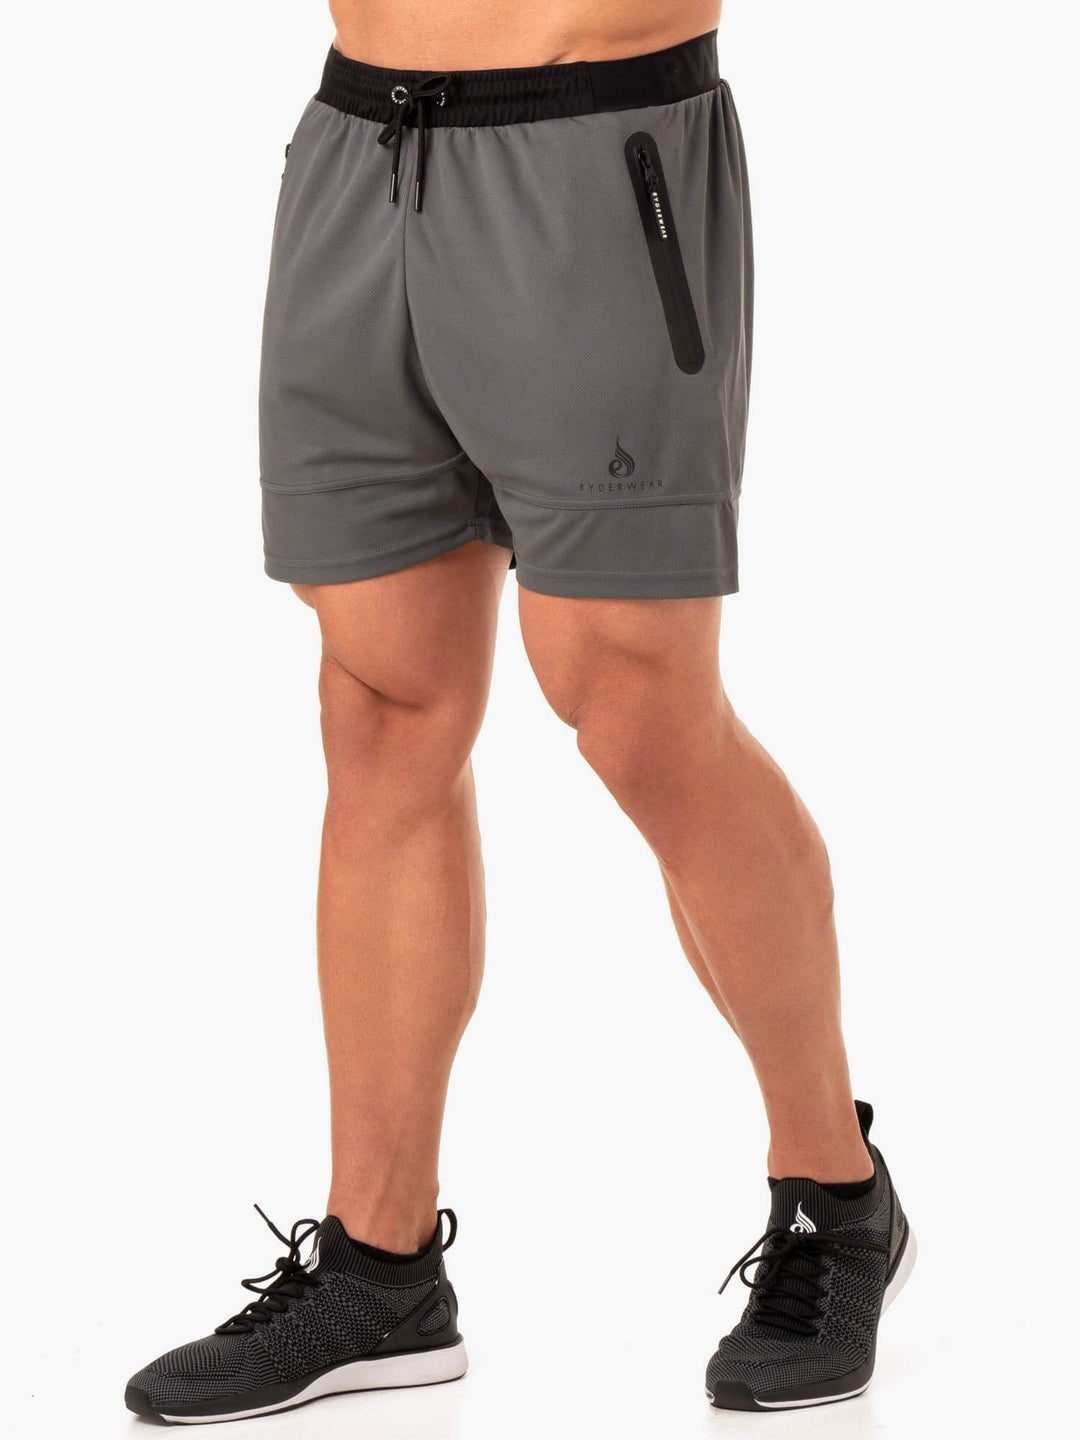 Action Mesh Short - Charcoal Clothing Ryderwear 